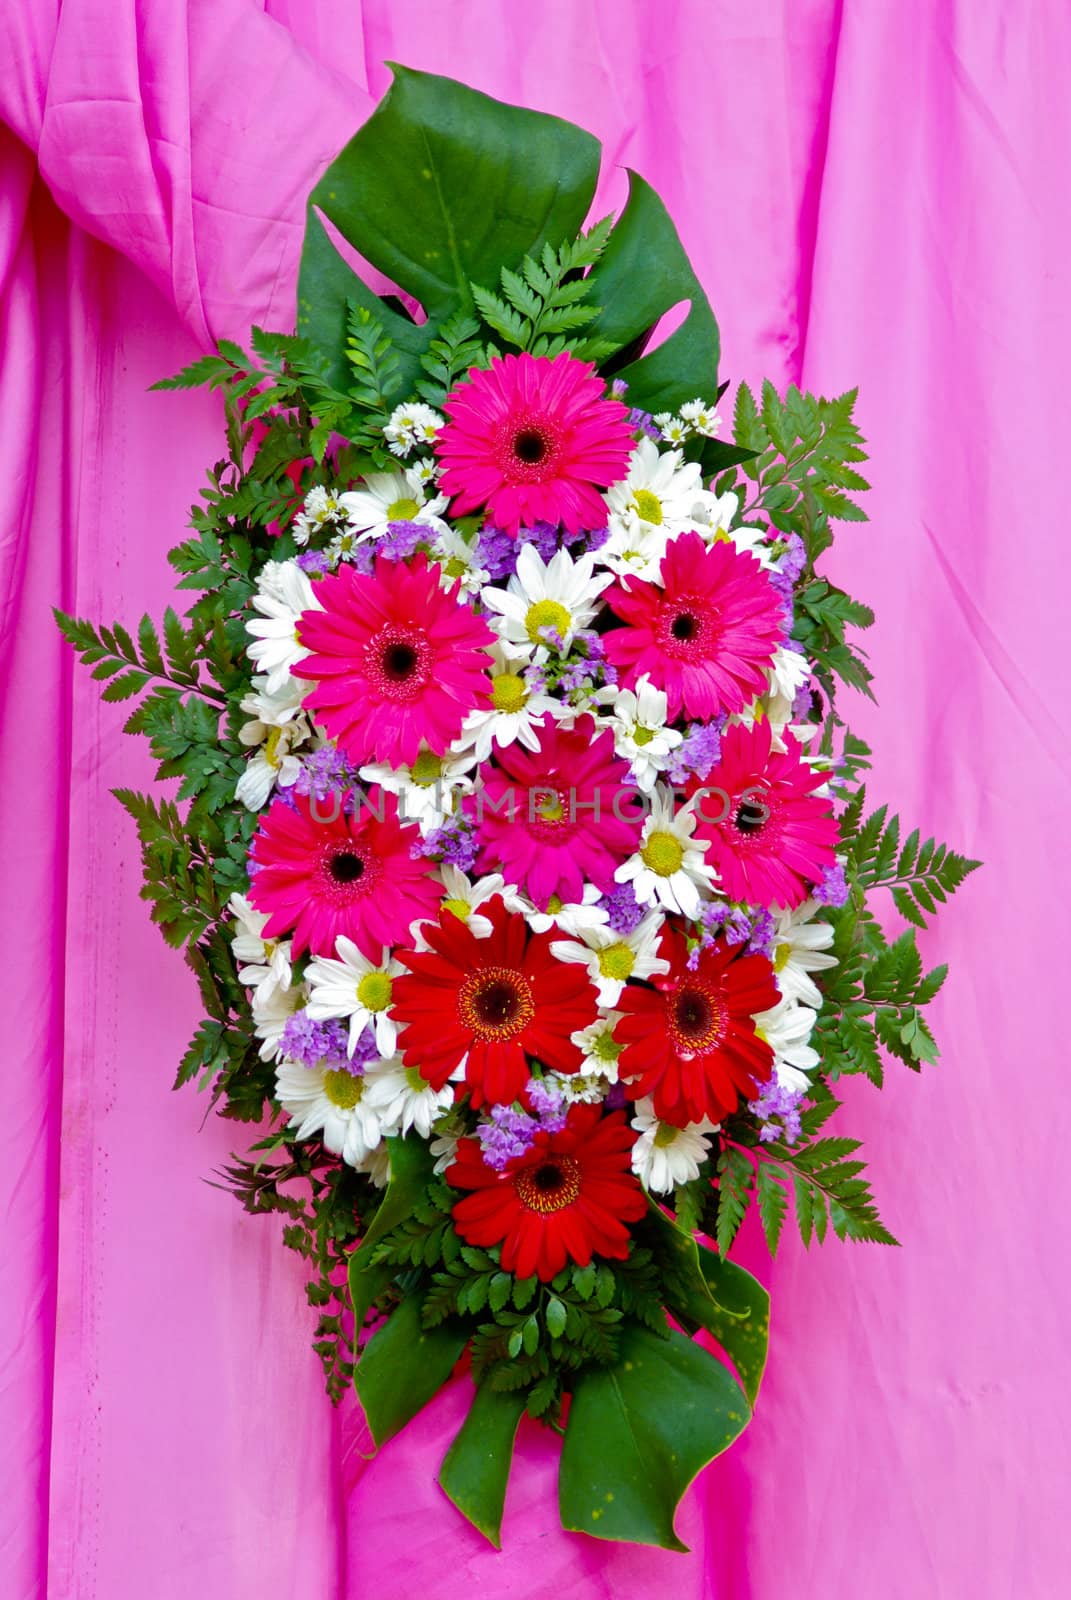 Nice Bouquet on pink fabric